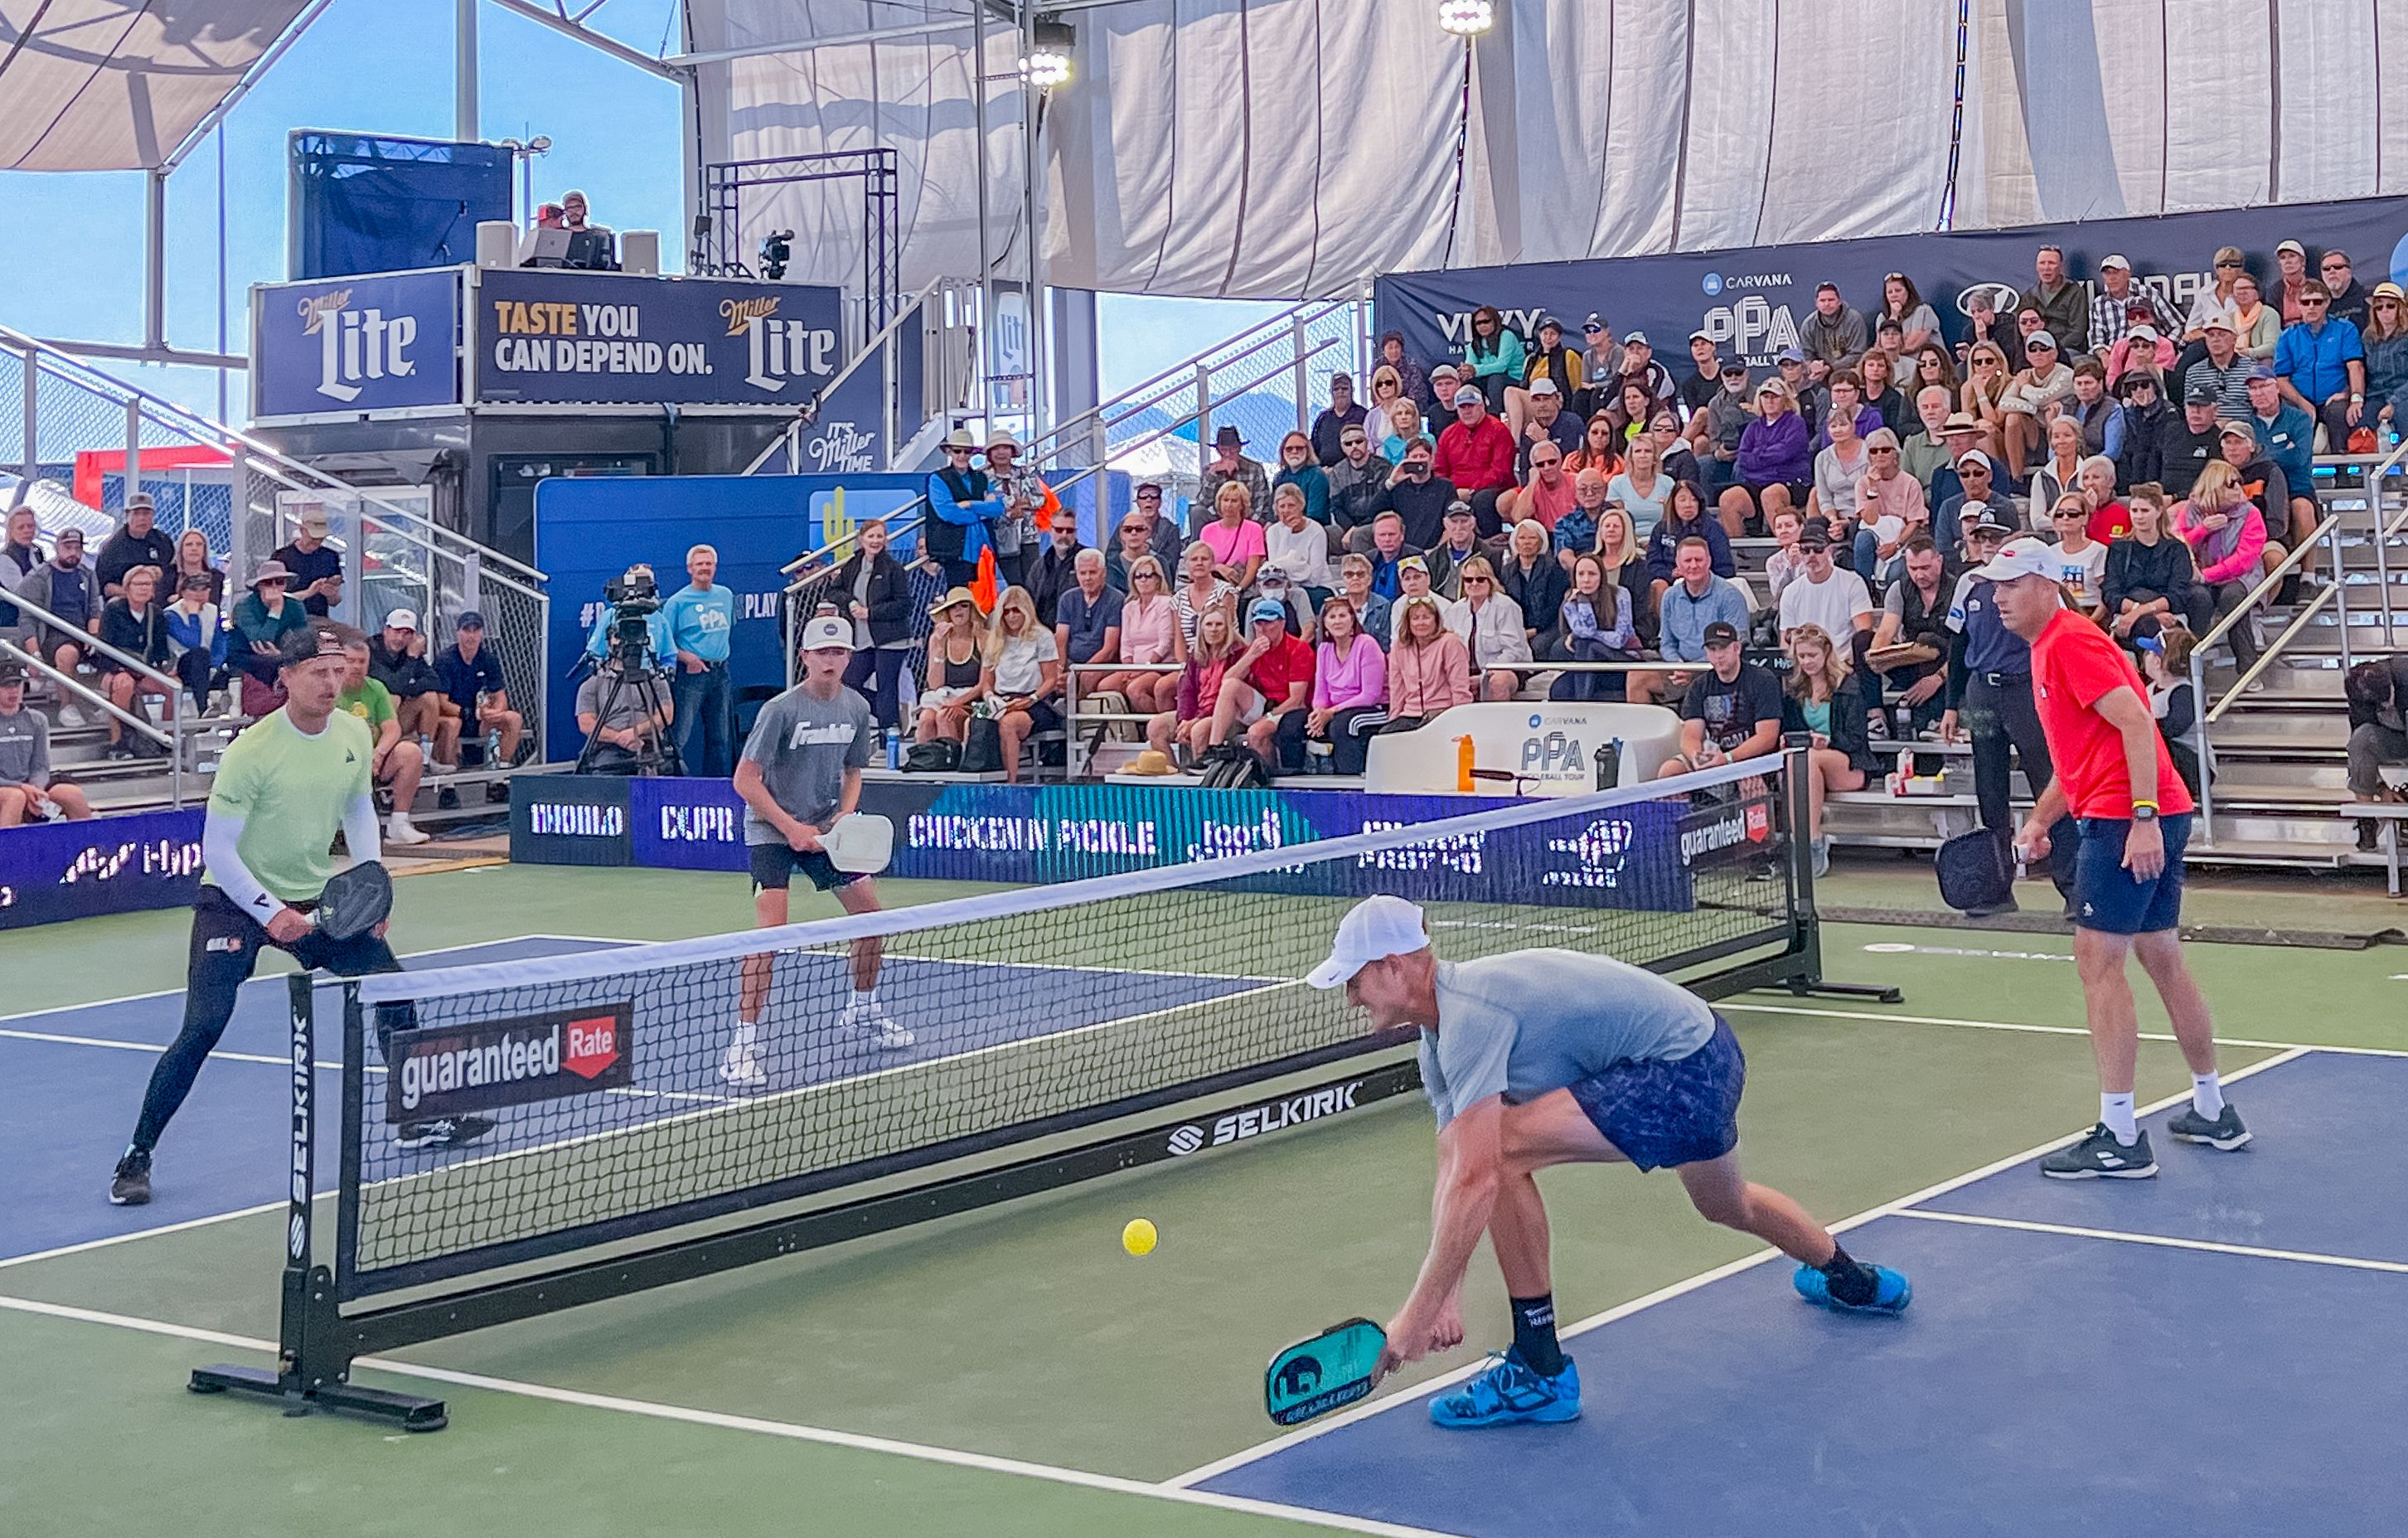 Players compete in a game of pickleball doubles at the Arizona Grand Slam